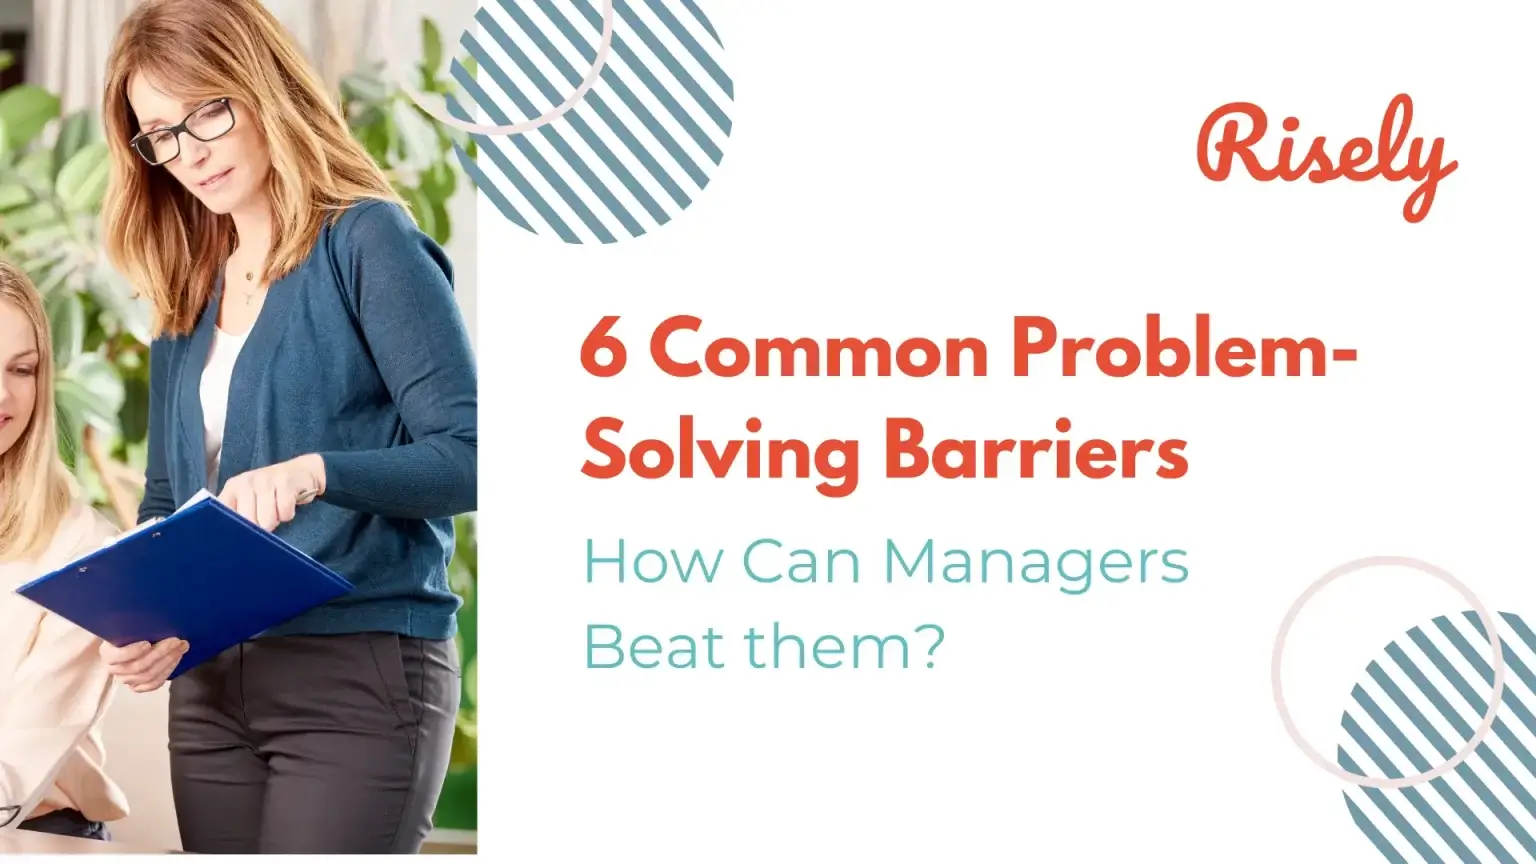 barriers of effective problem solving